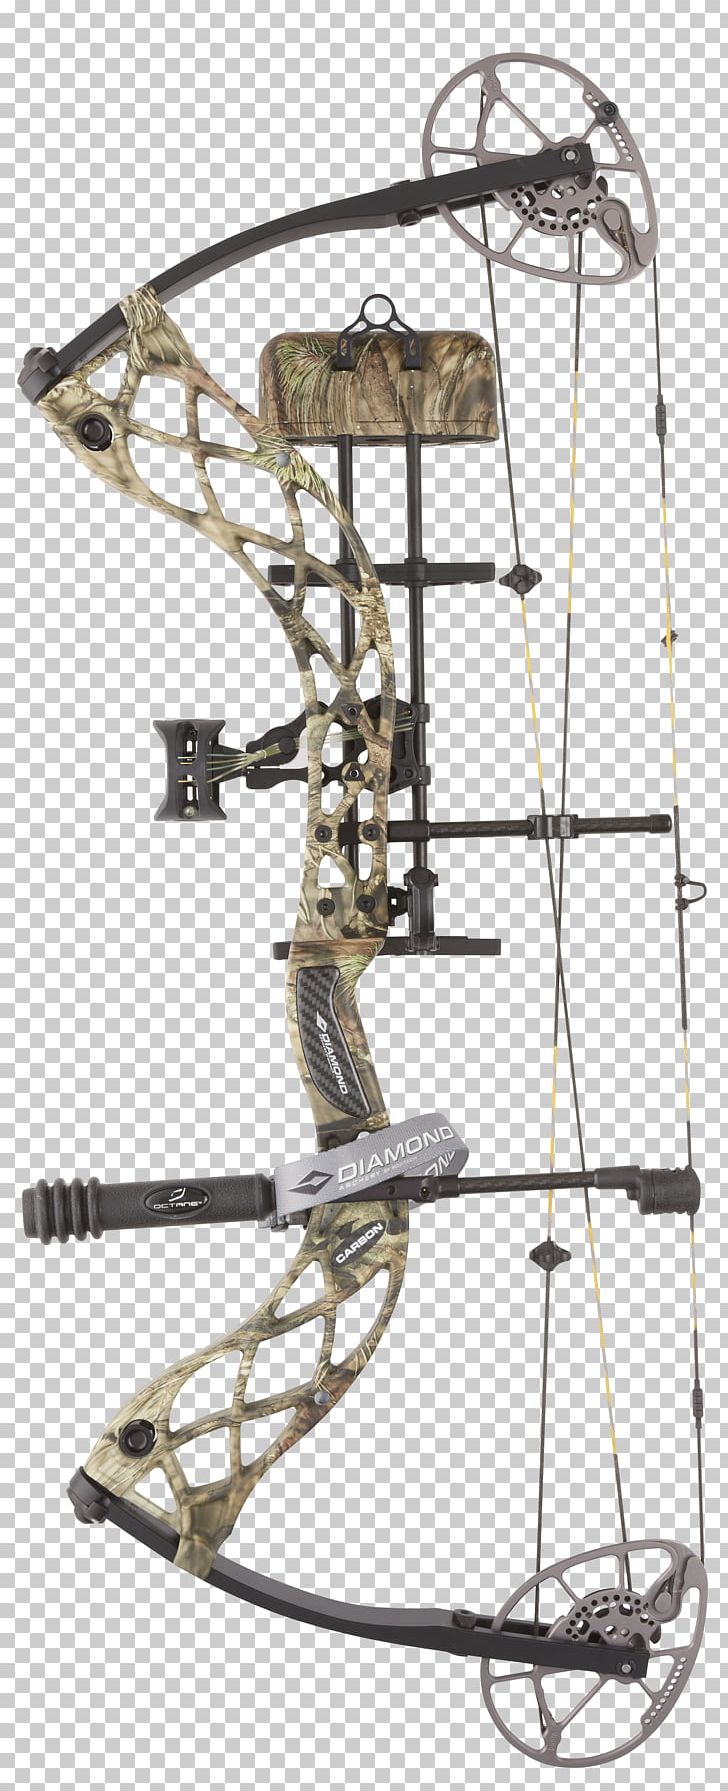 Compound Bows Bow And Arrow Binary Cam Archery Hunting PNG, Clipart, Archery, Arrow, Binary Cam, Bow, Bow And Arrow Free PNG Download